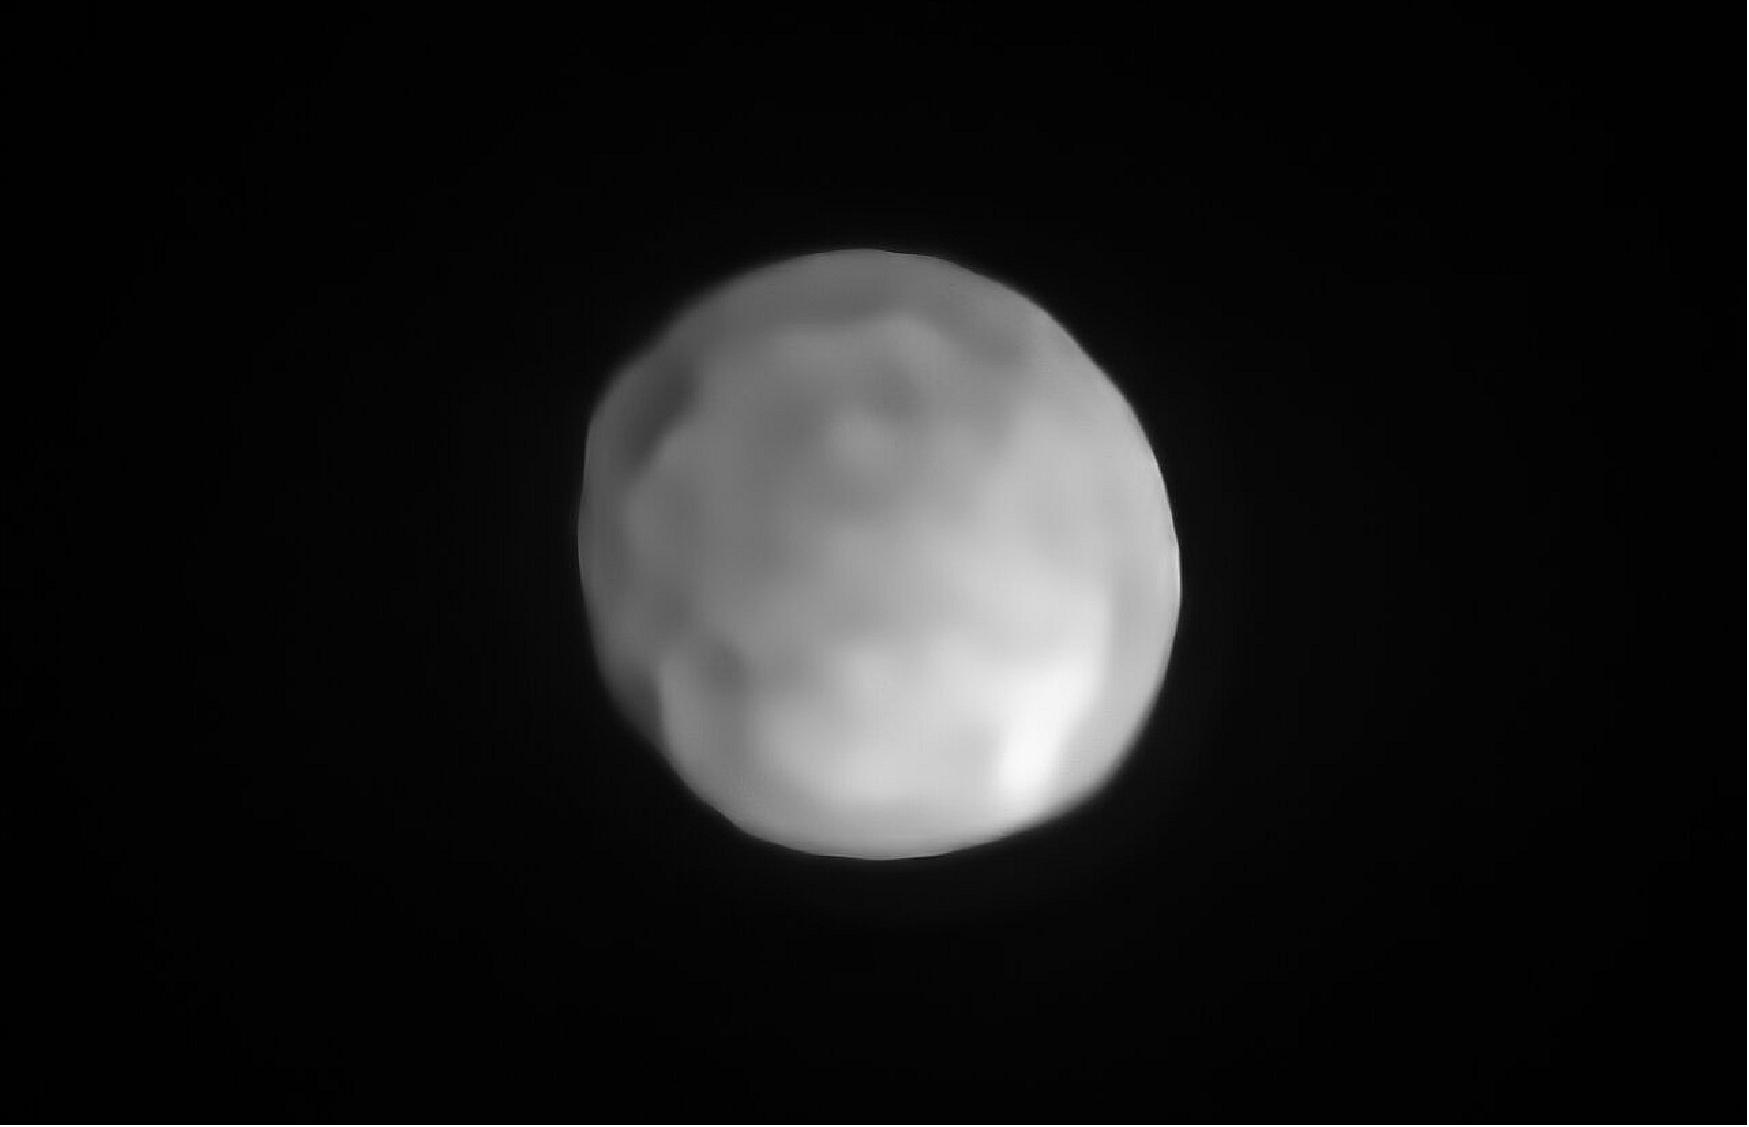 Figure 46: A new SPHERE/VLT image of Hygiea, which could be the Solar System’s smallest dwarf planet yet. As an object in the main asteroid belt, Hygiea satisfies right away three of the four requirements to be classified as a dwarf planet: it orbits around the Sun, it is not a moon and, unlike a planet, it has not cleared the neighborhood around its orbit. The final requirement is that it have enough mass that its own gravity pulls it into a roughly spherical shape. This is what VLT observations have now revealed about Hygiea [image credit: ESO/P. Vernazza et al./MISTRAL algorithm (ONERA/CNRS)]